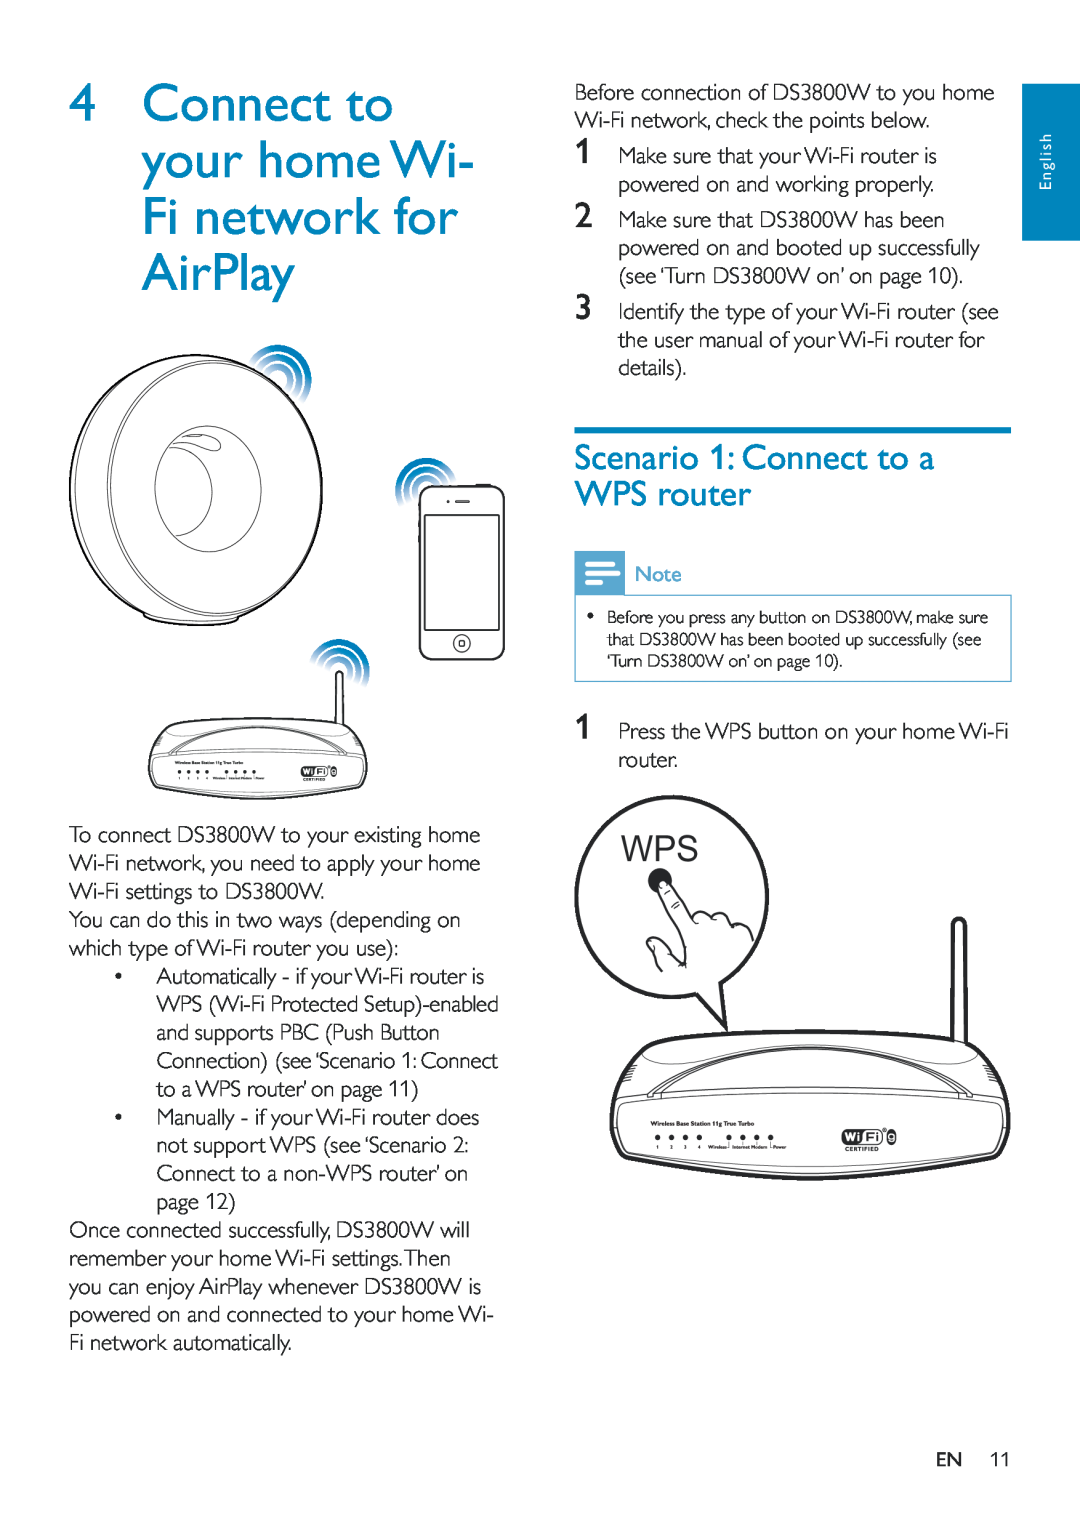 Philips DS3800W/10 user manual 4Connect to your home Wi- Fi network for AirPlay, Scenario 1 Connect to a WPS router 